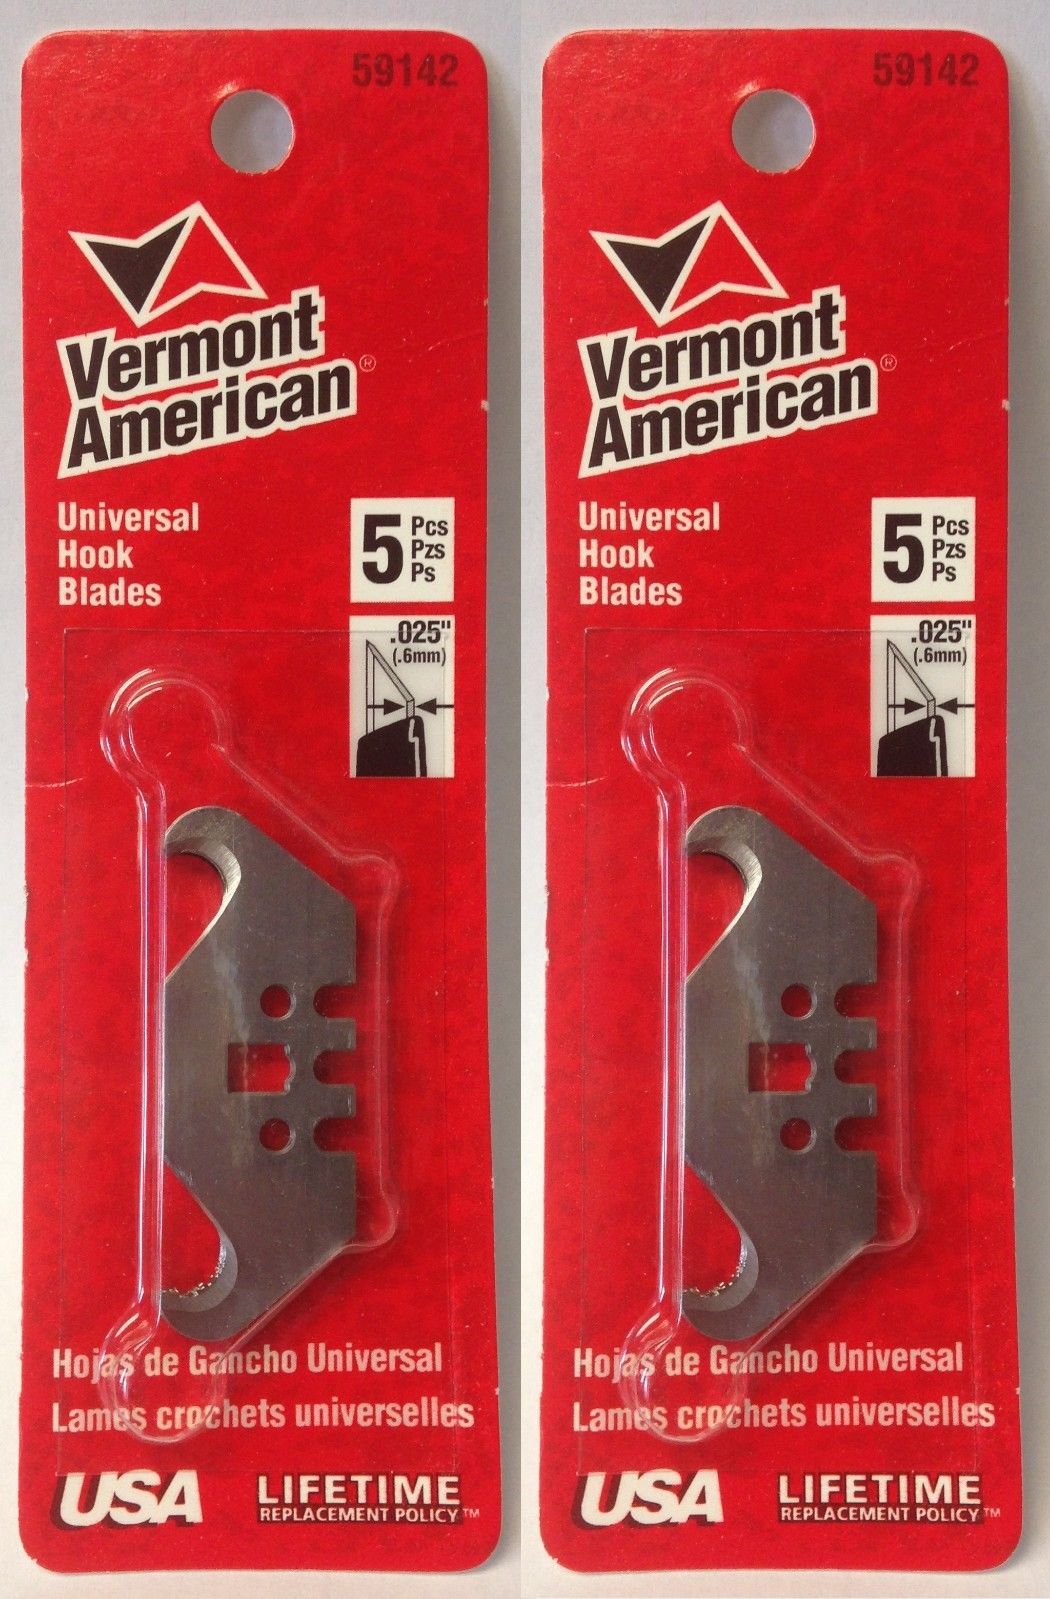 Vermont American 59142 Universal Hook Blades 2 Packs of 5 USA